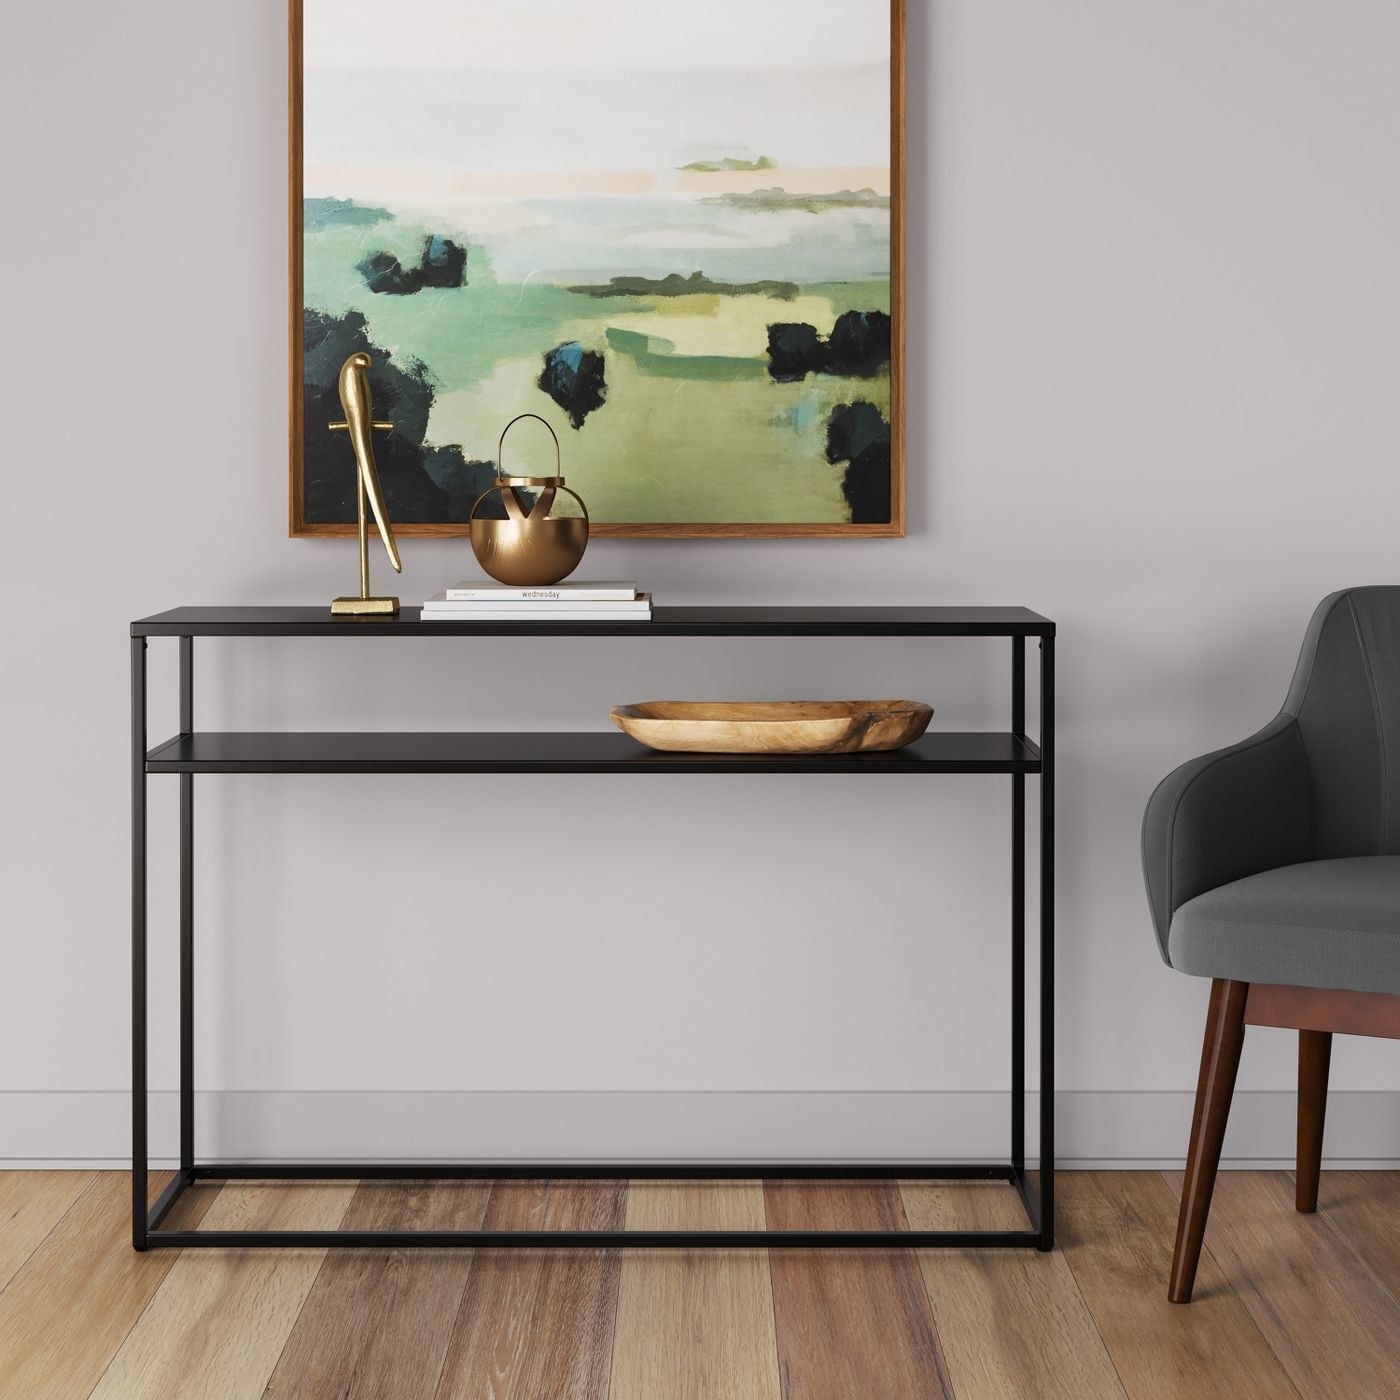 The black metal console table